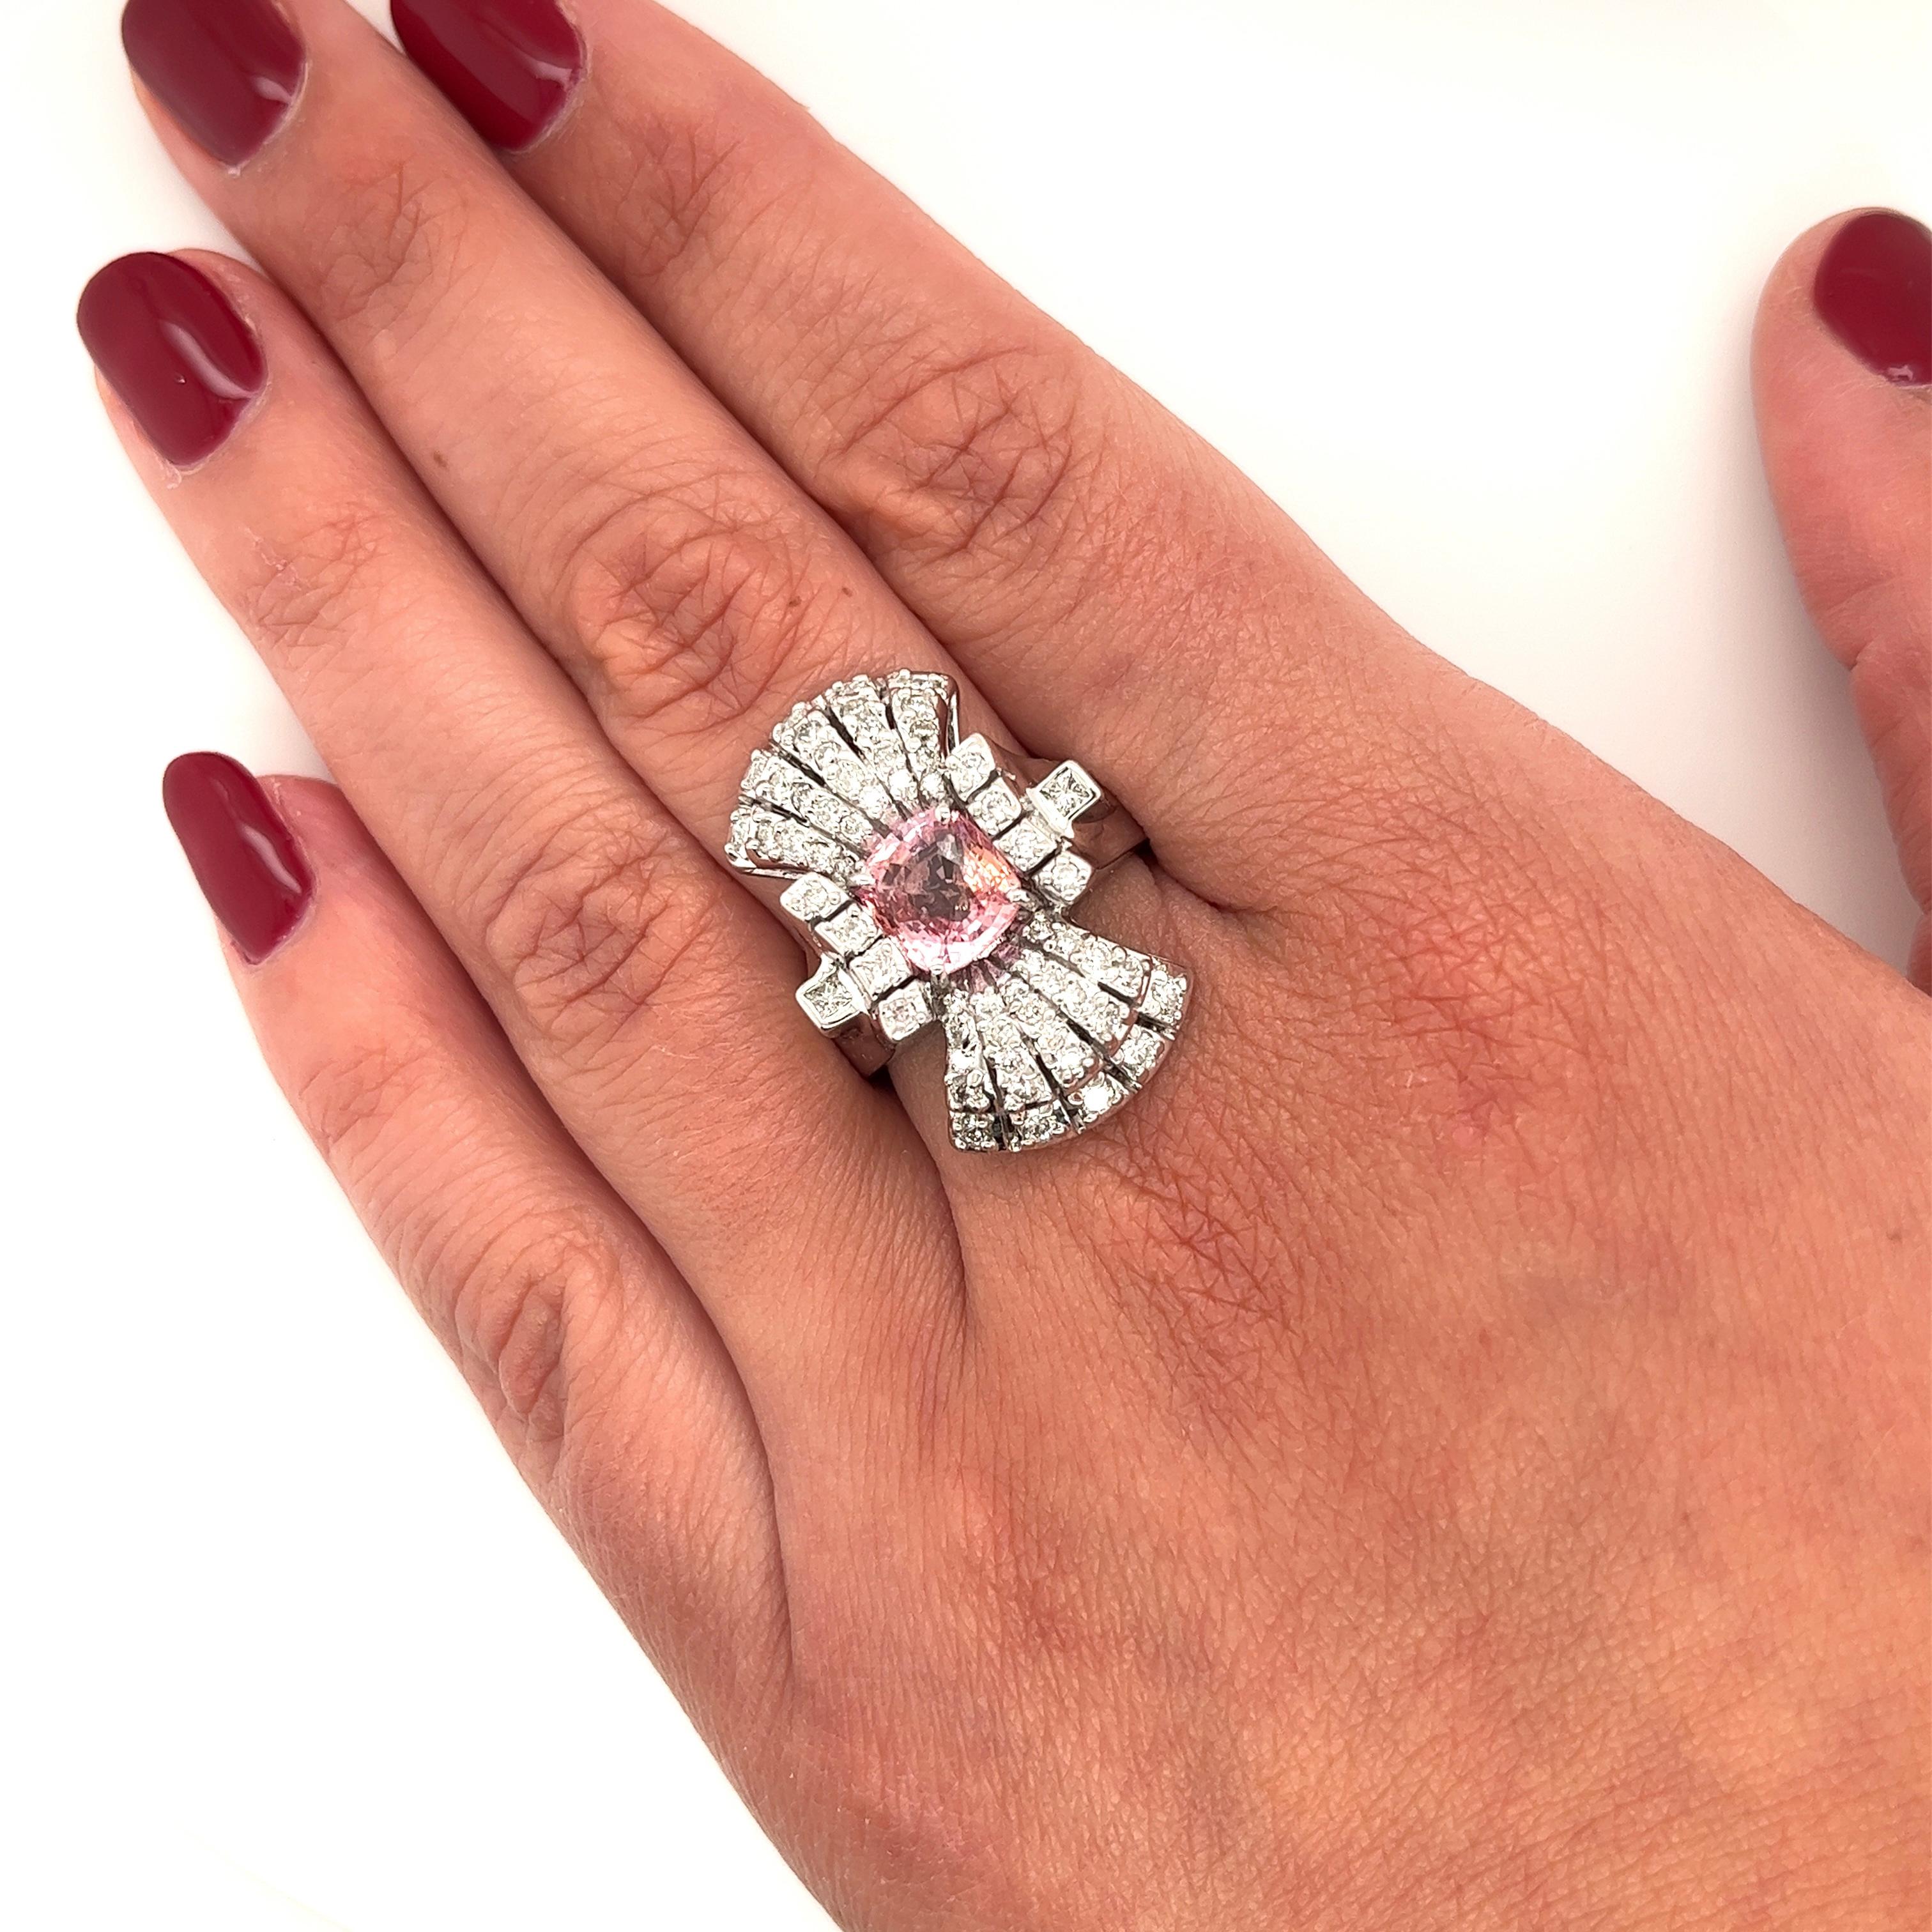 18 karat white gold Edwardian era-inspired Pink Sapphire and Diamond cluster vertical ring. GIA certified with Sapphire origin report and ring description. Both the center stone and the diamonds are radiating with brilliance and sparkle. The